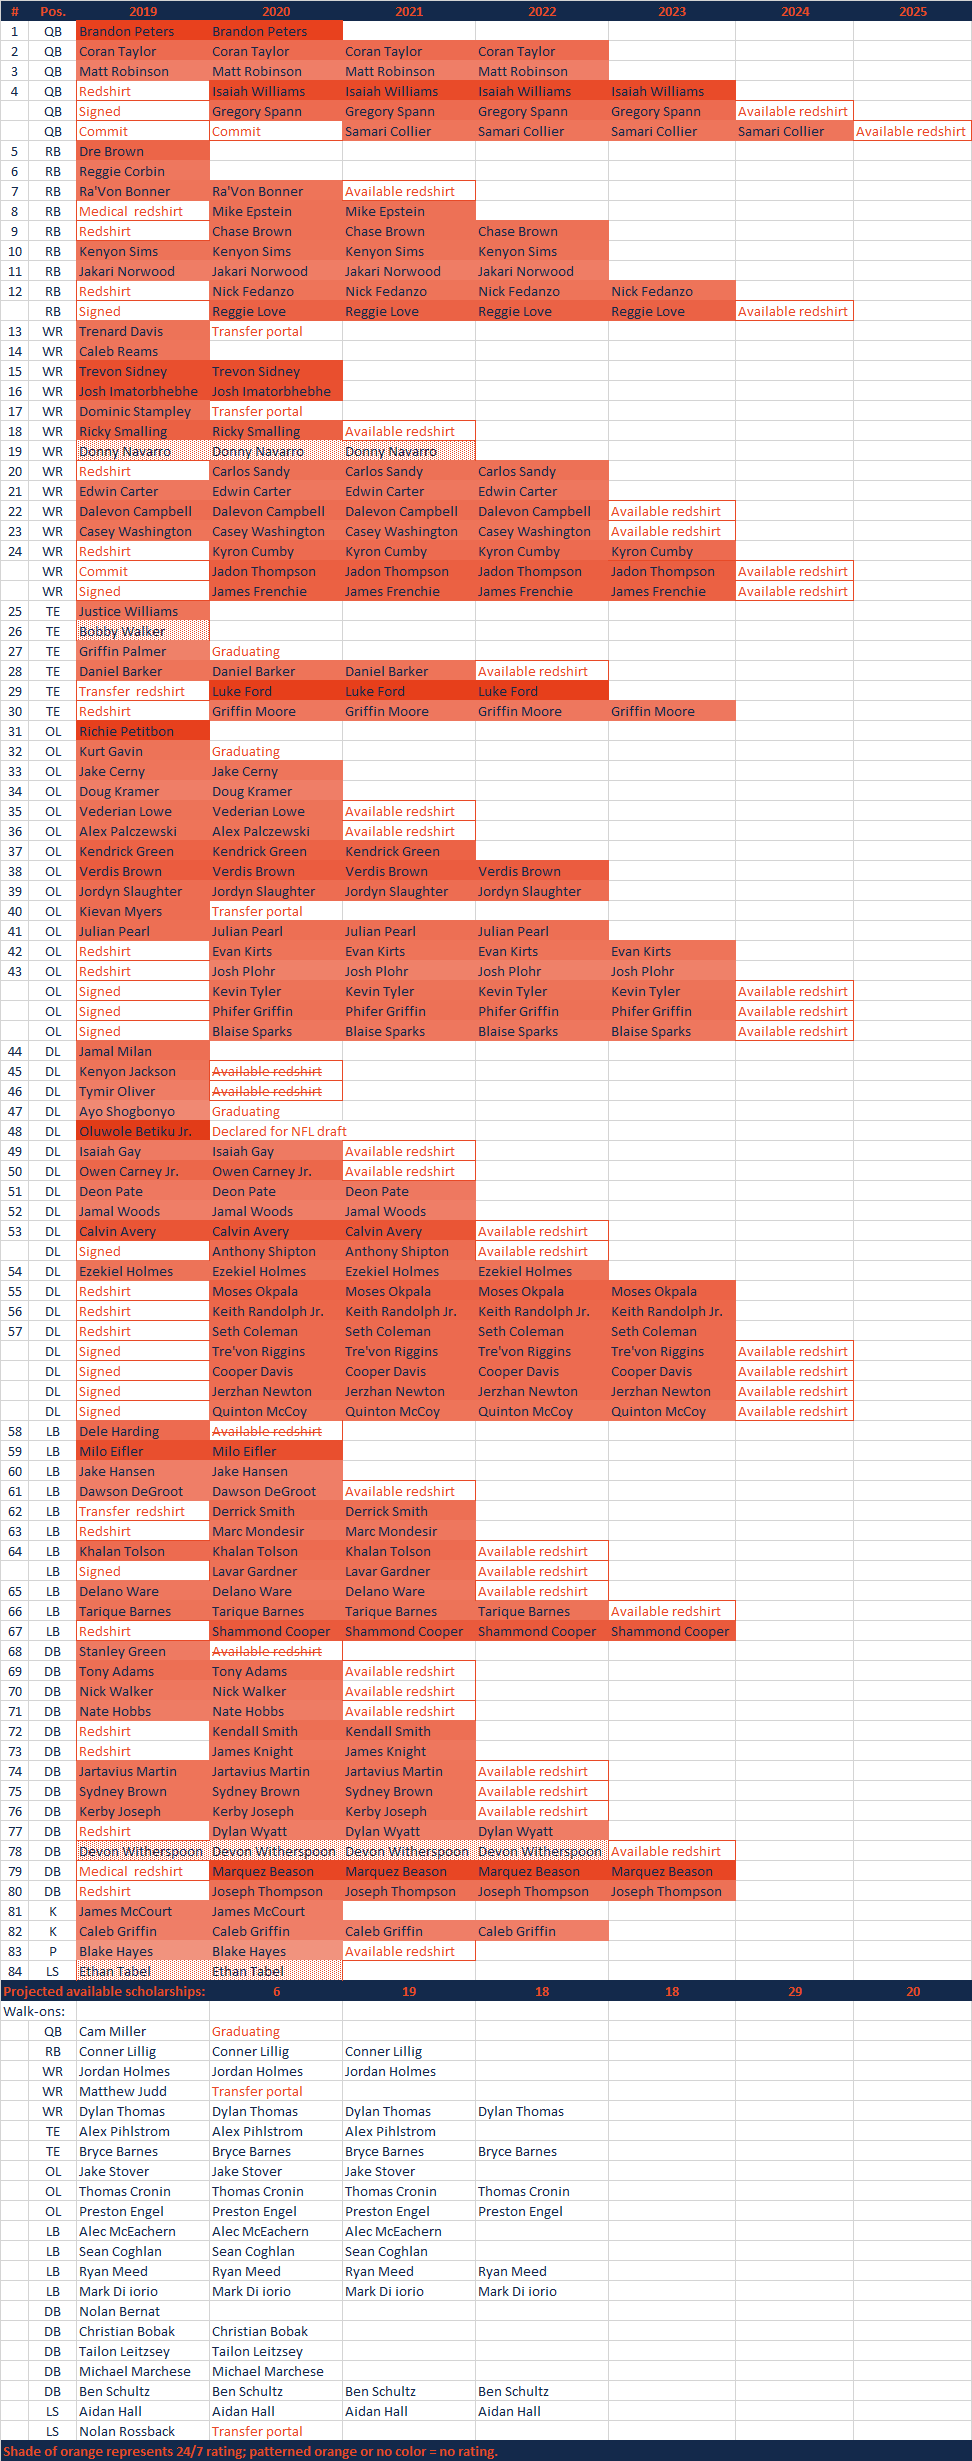 2019ScholarshipGrid.png